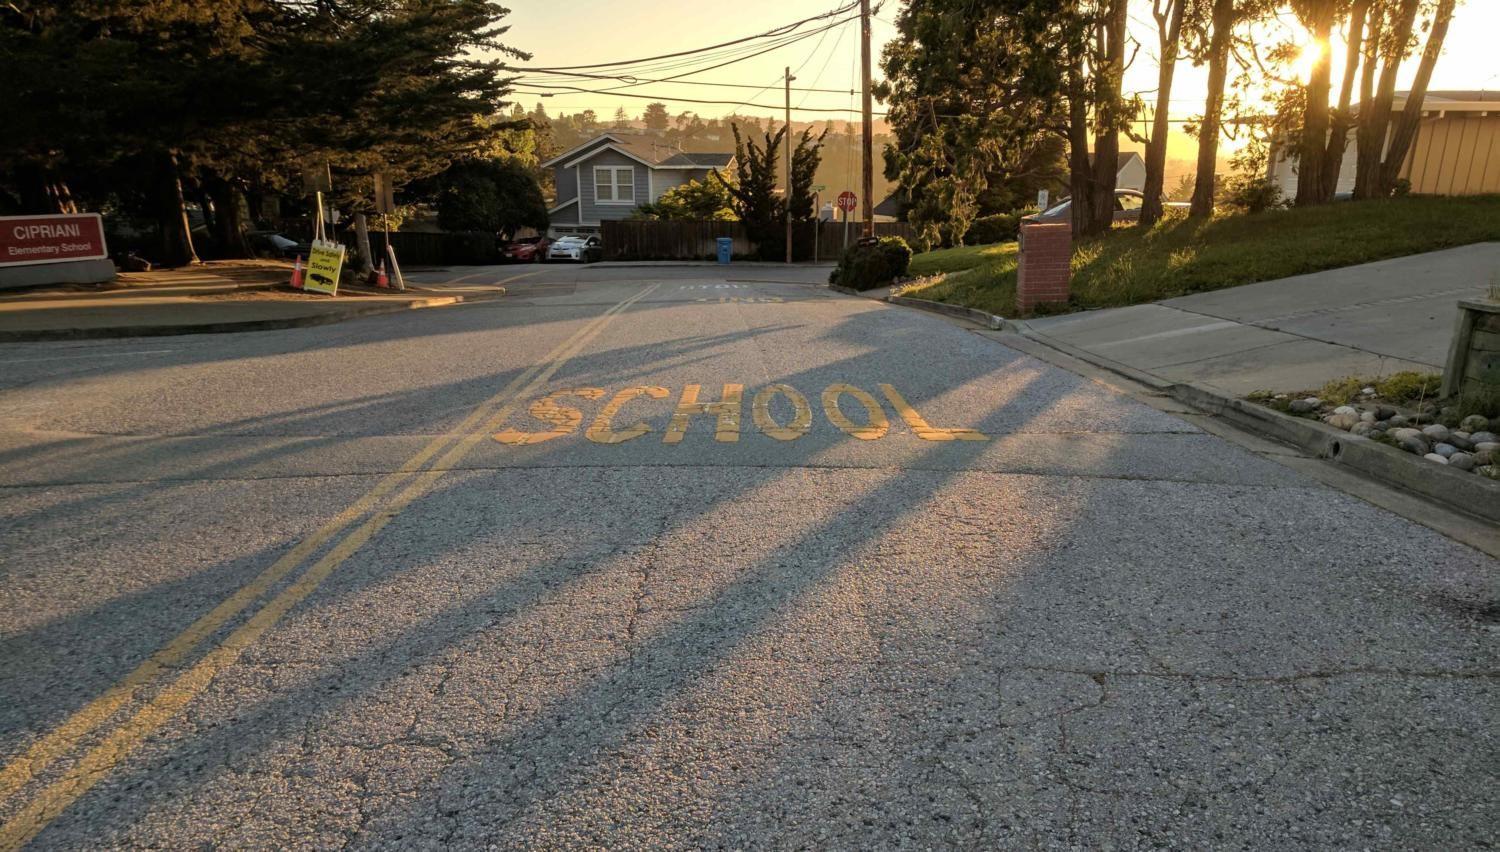 Buena Vista Avenue, home to Cipriani Elementary School, is one of the worst roads in the Bay Area.